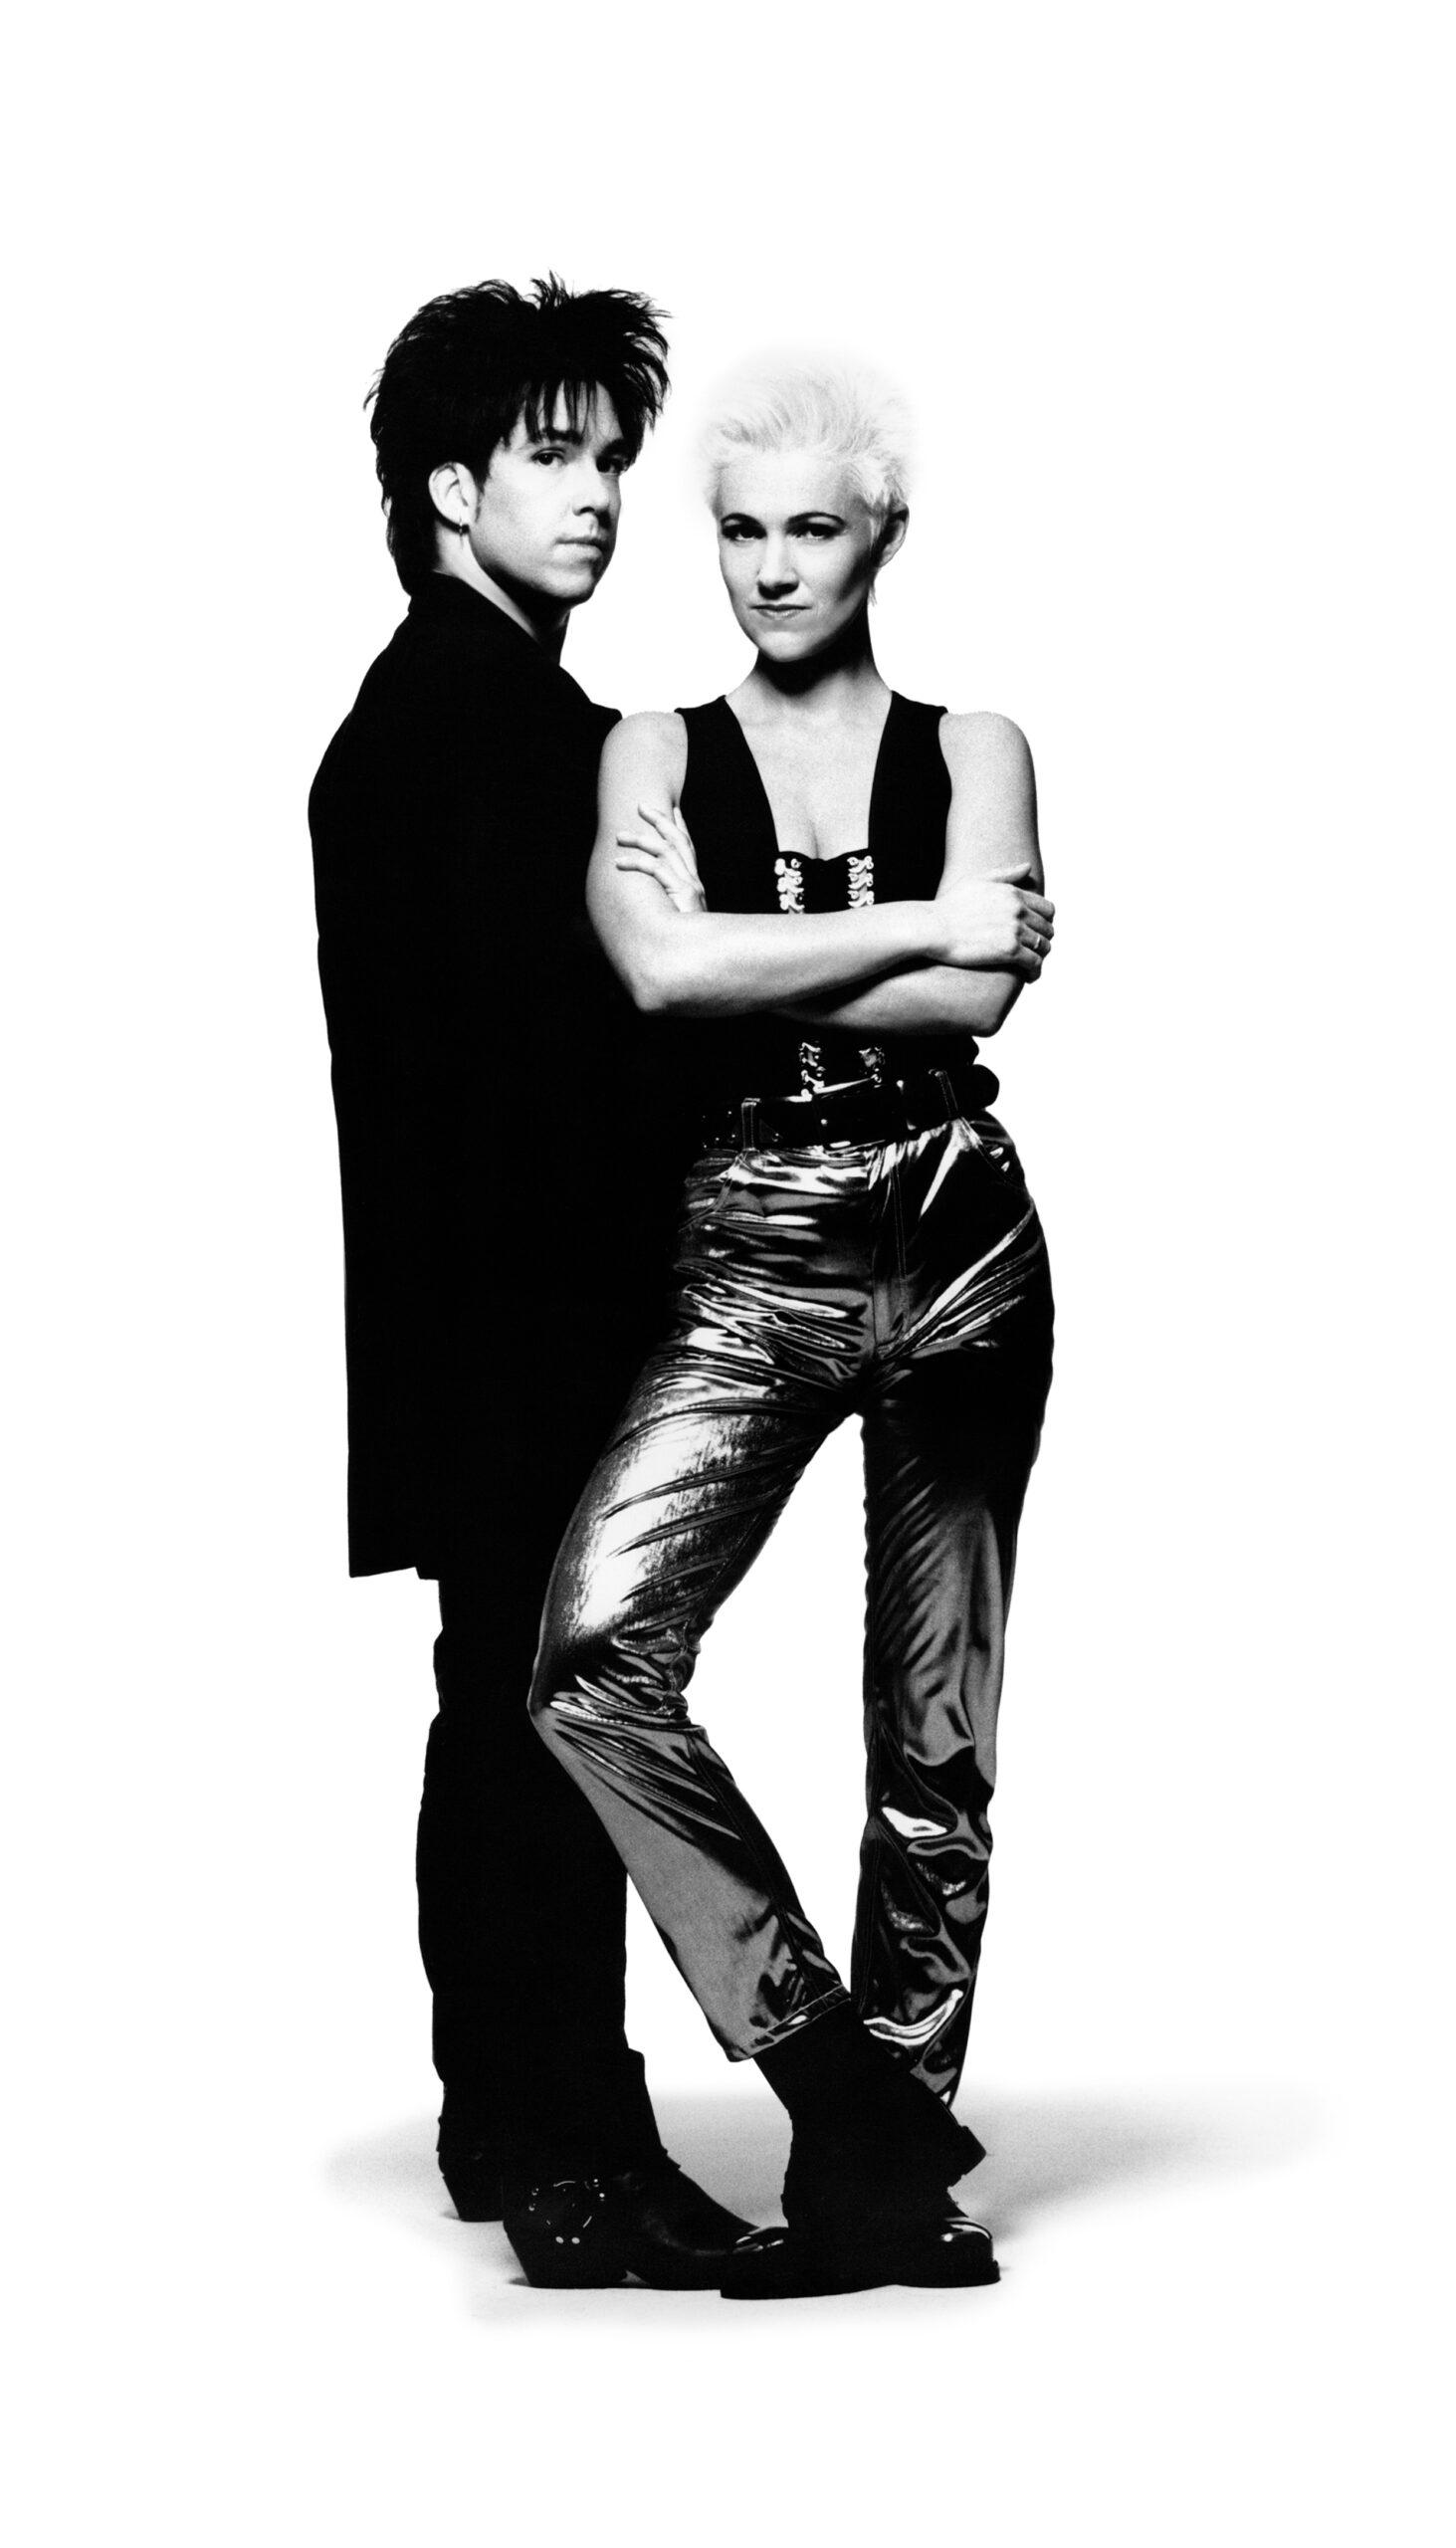 Black-and-white photo of the band Roxette, with Per Gessle to the left and Marie Fredriksson to the right. Roxette helped put Swedish music on the world map. 